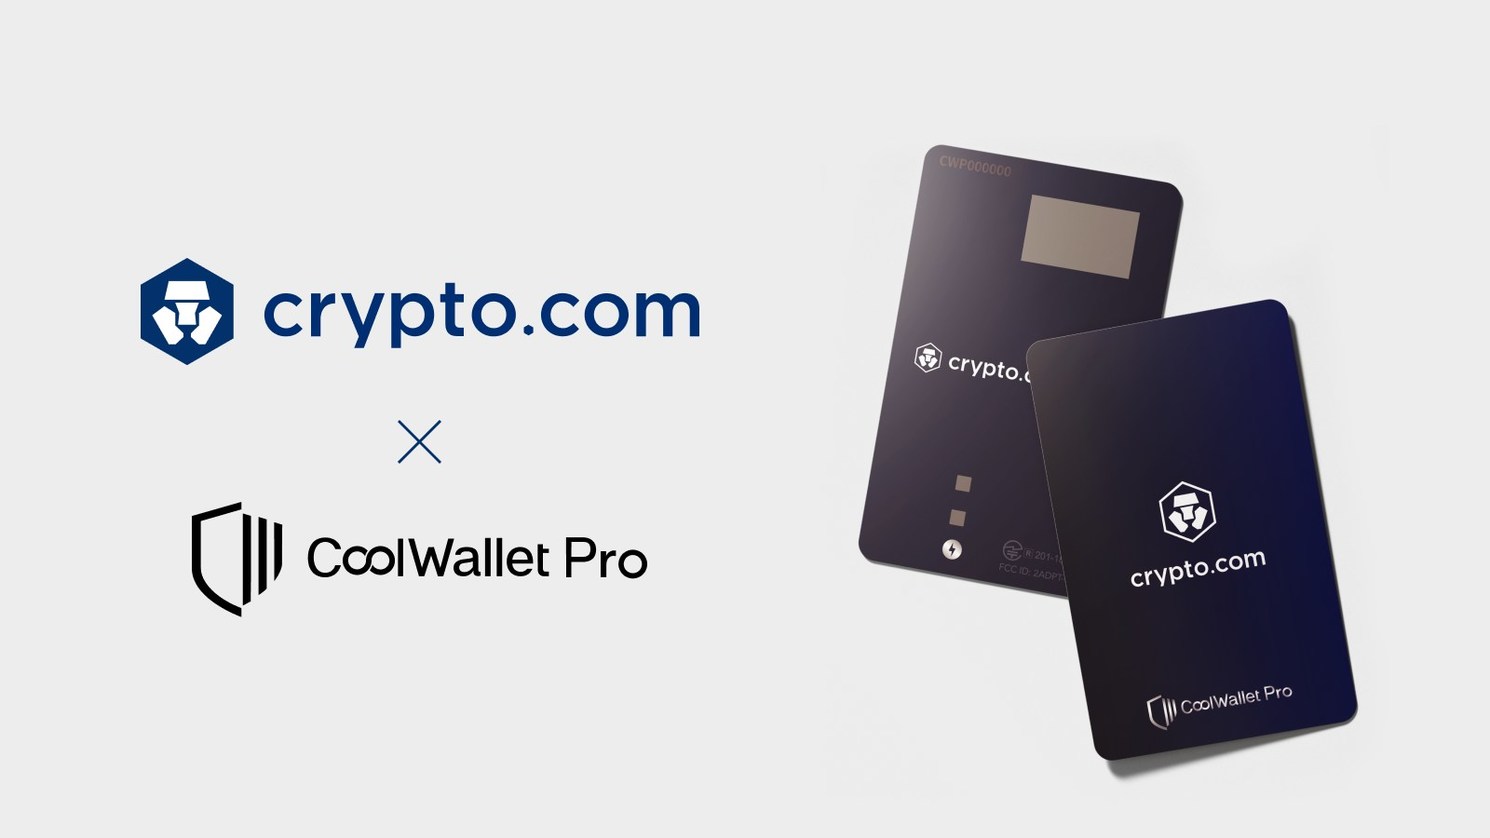 CoolBitX And Crypto.com Team Up For Special Edition CoolWallet Pro Hardware  Wallet, CRO Support and Payment Integration